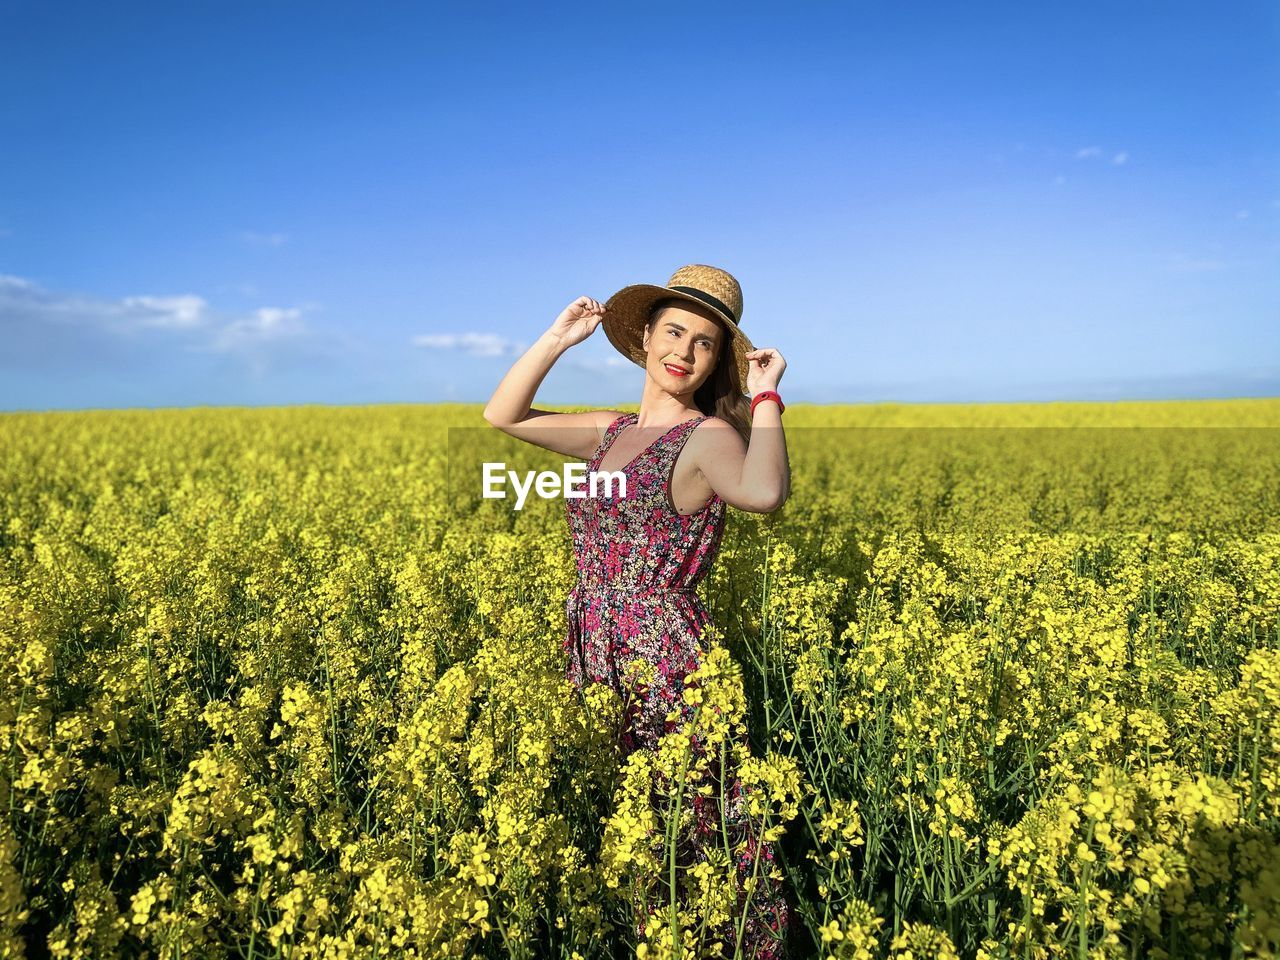 Happy woman wearing dress and hat in a field of canola flowers on a sunny day